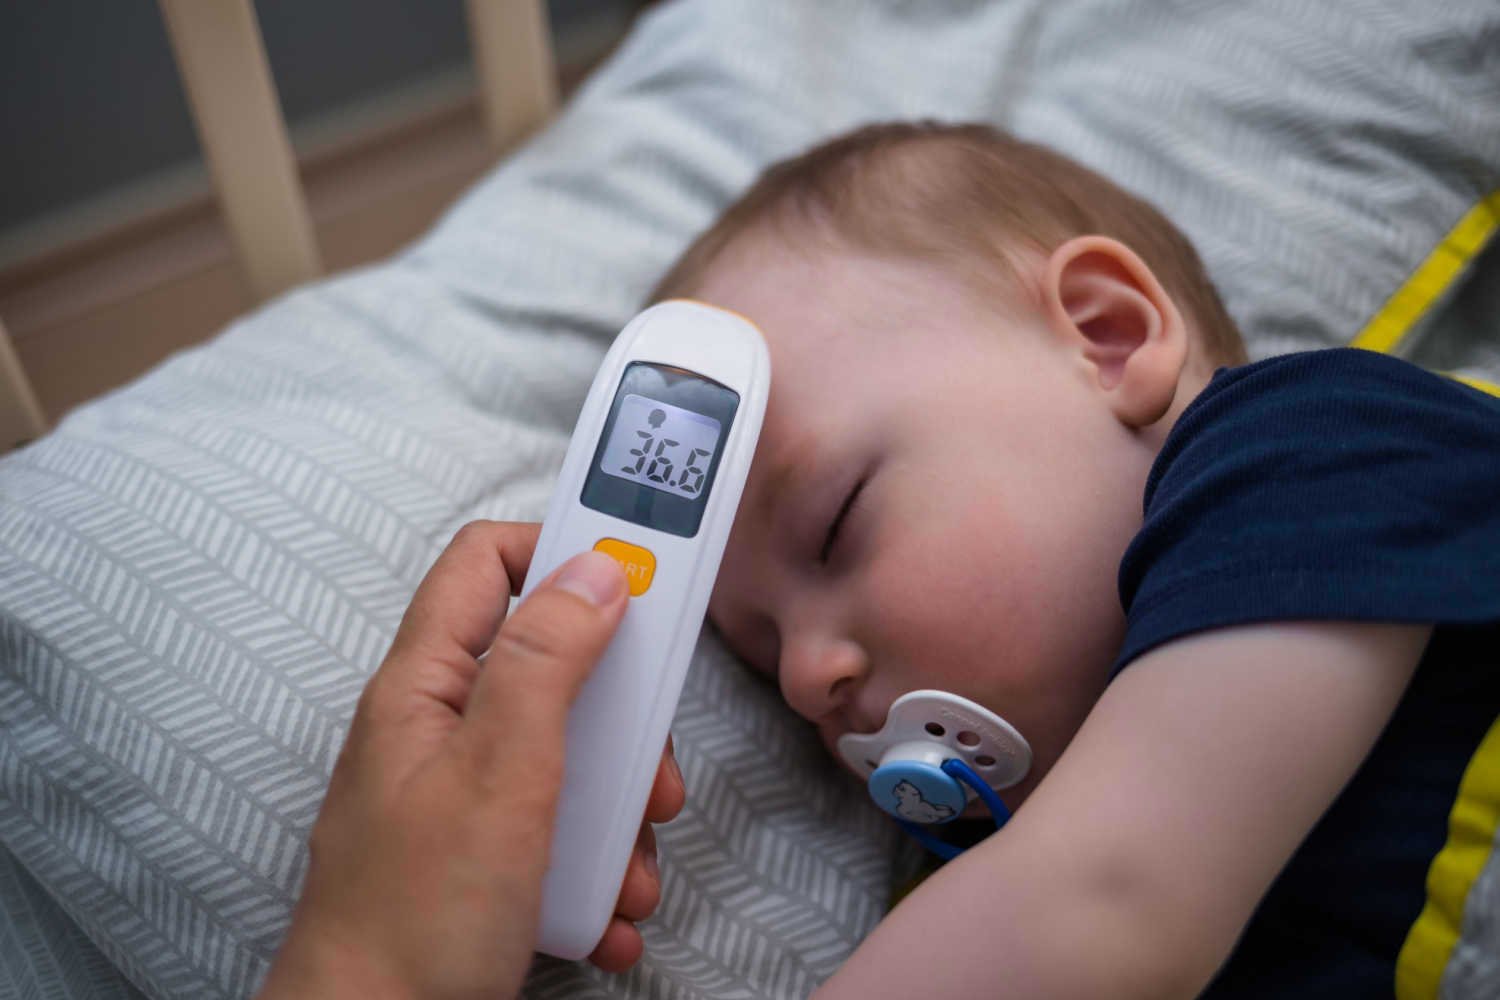 How To Check Baby's Temperature Using A Digital Thermometer?